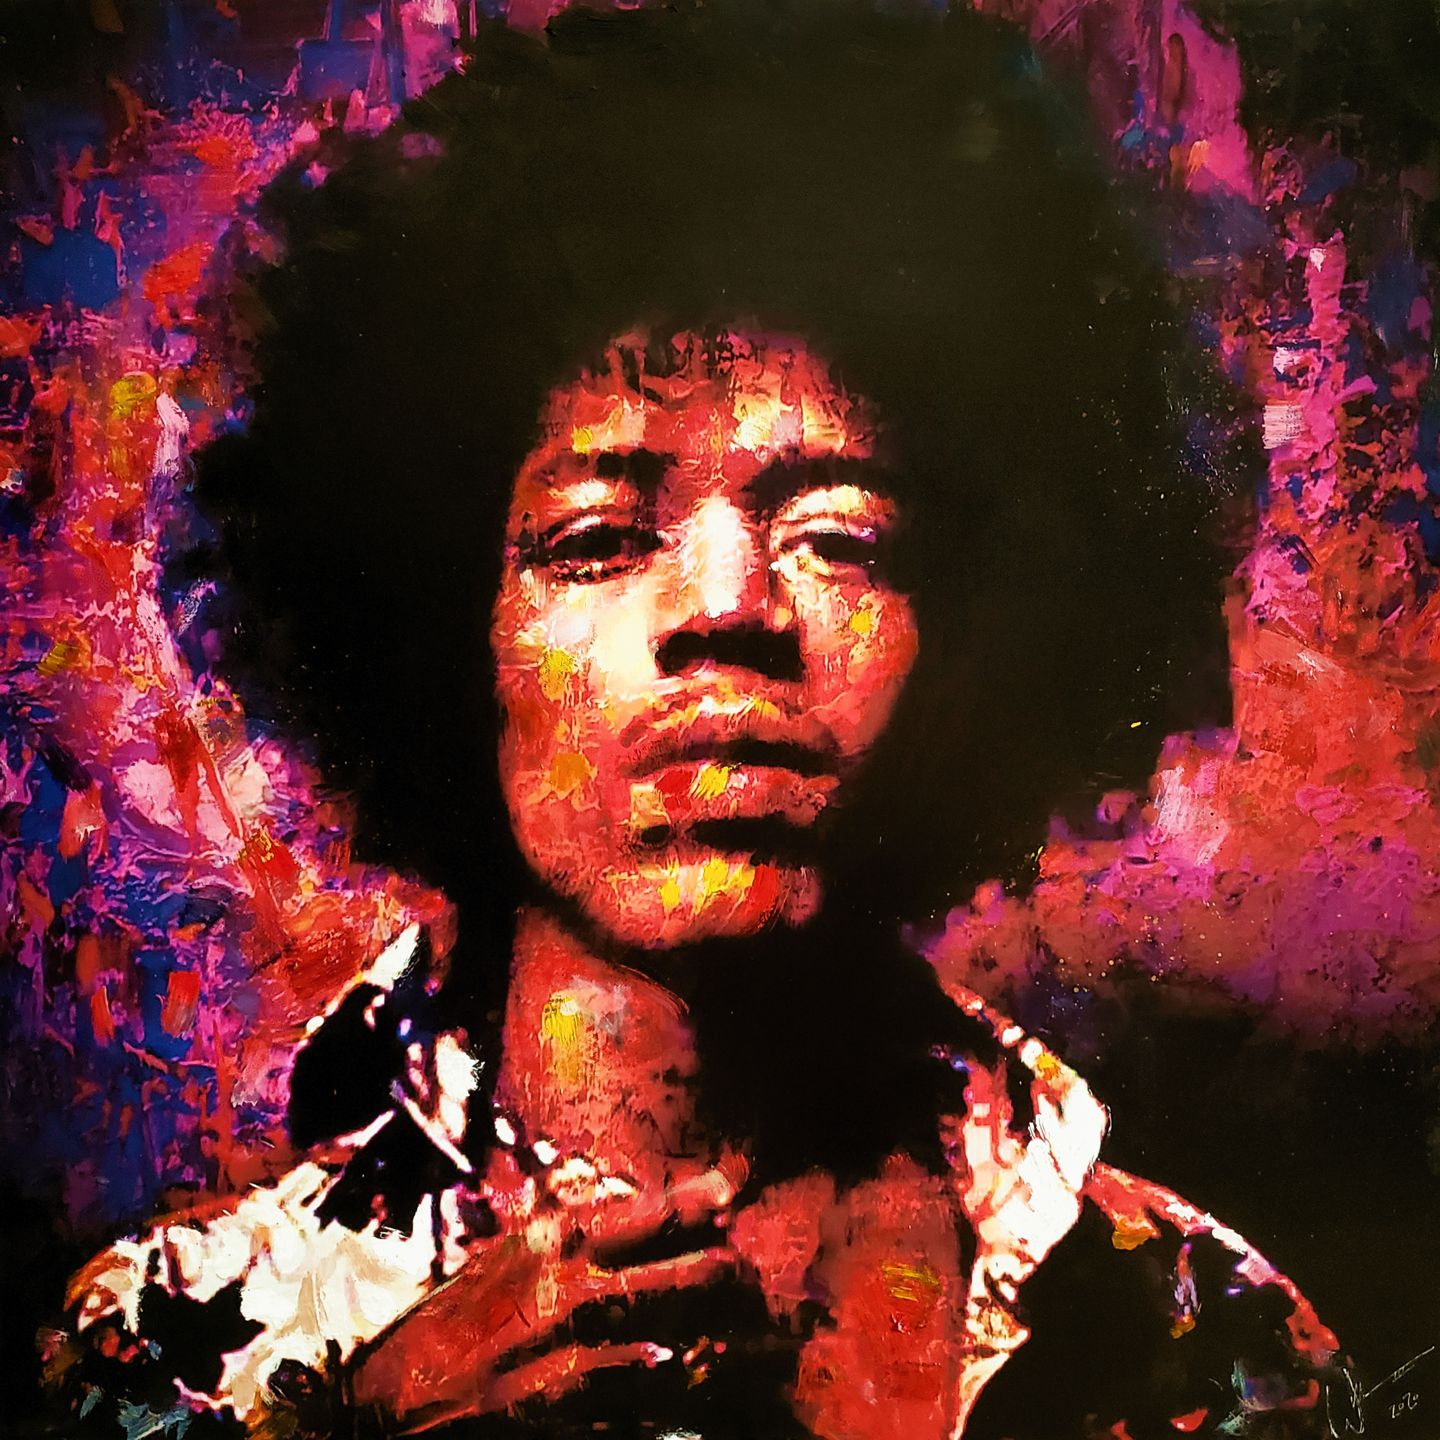 "Are You Experienced" Jimi Hendrix painting by artist, William III